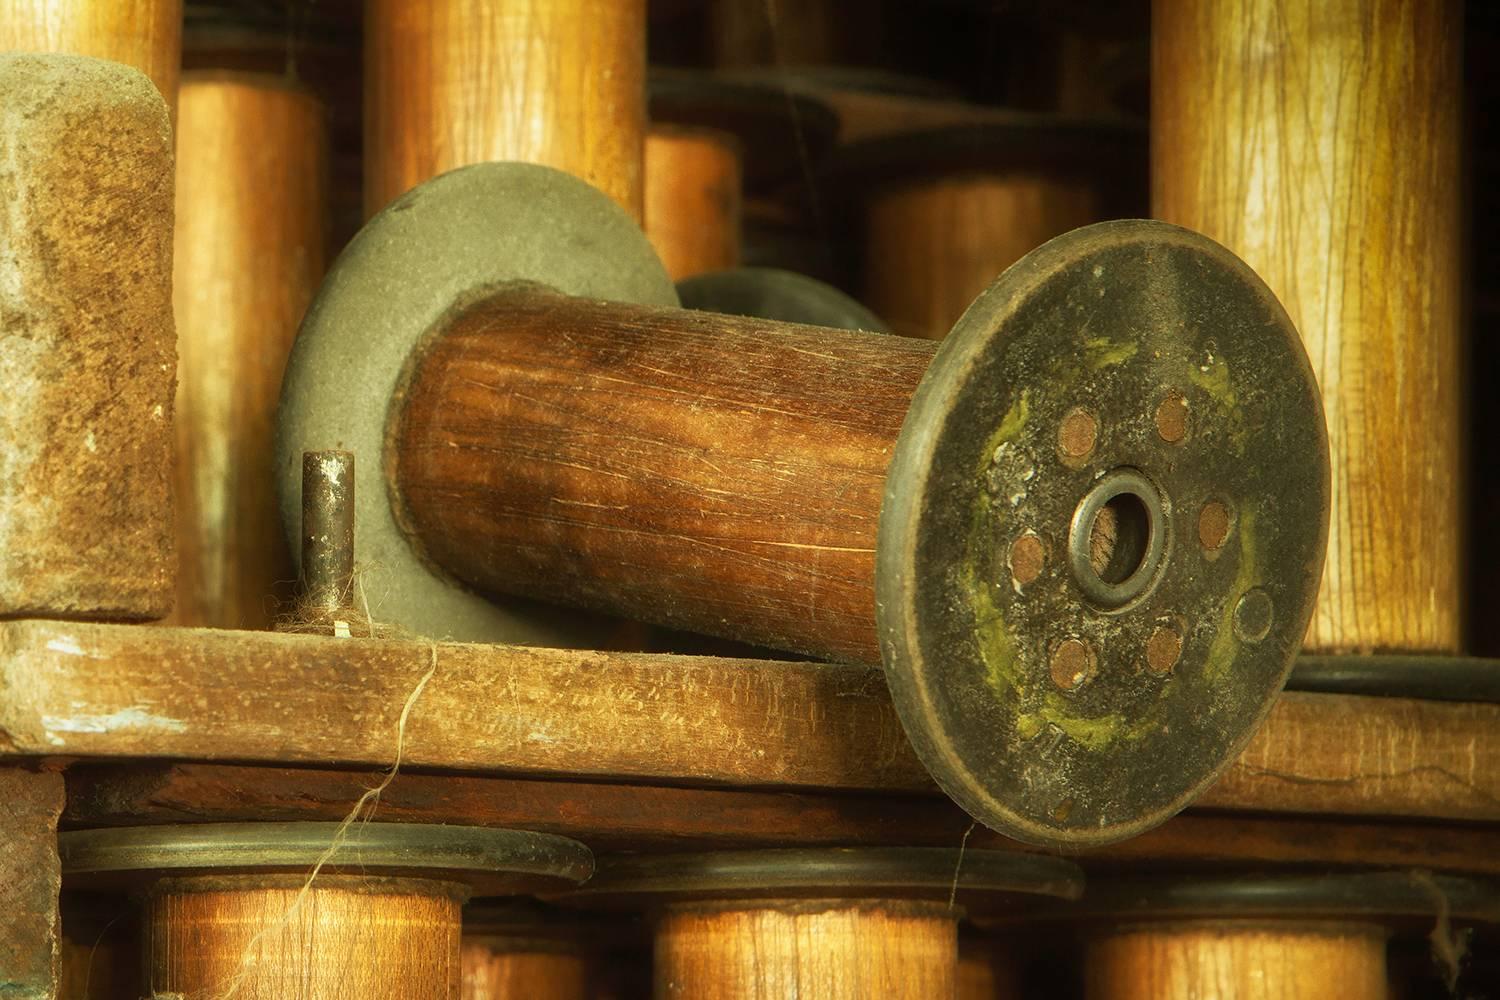 Spools - Photograph by Rebecca Skinner